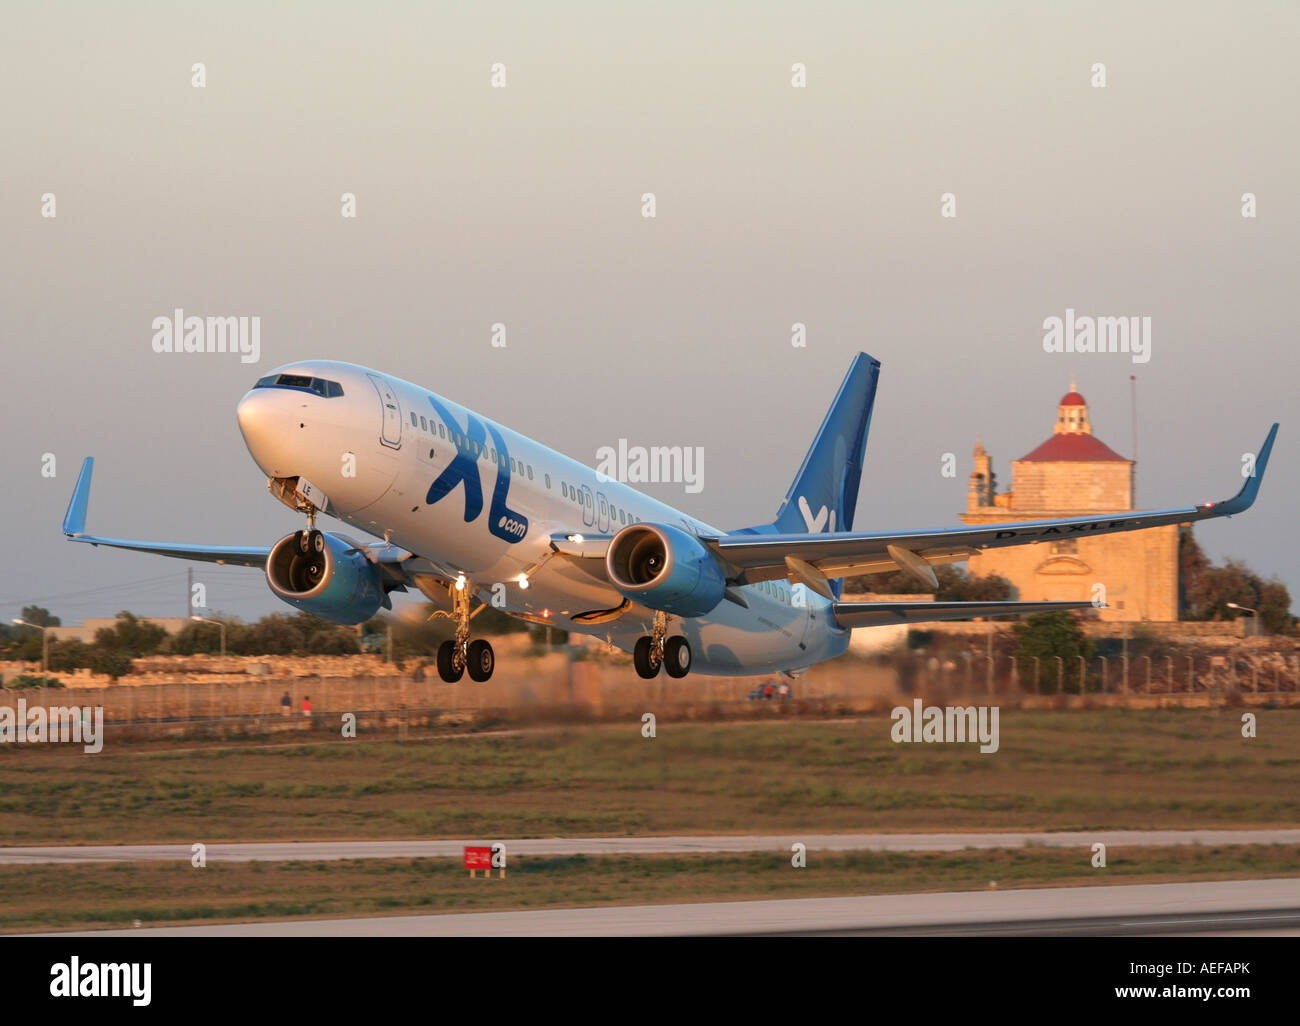 XL Airways Germany Boeing 737-800 passenger jet plane taking off from Malta at sunset Stock Photo